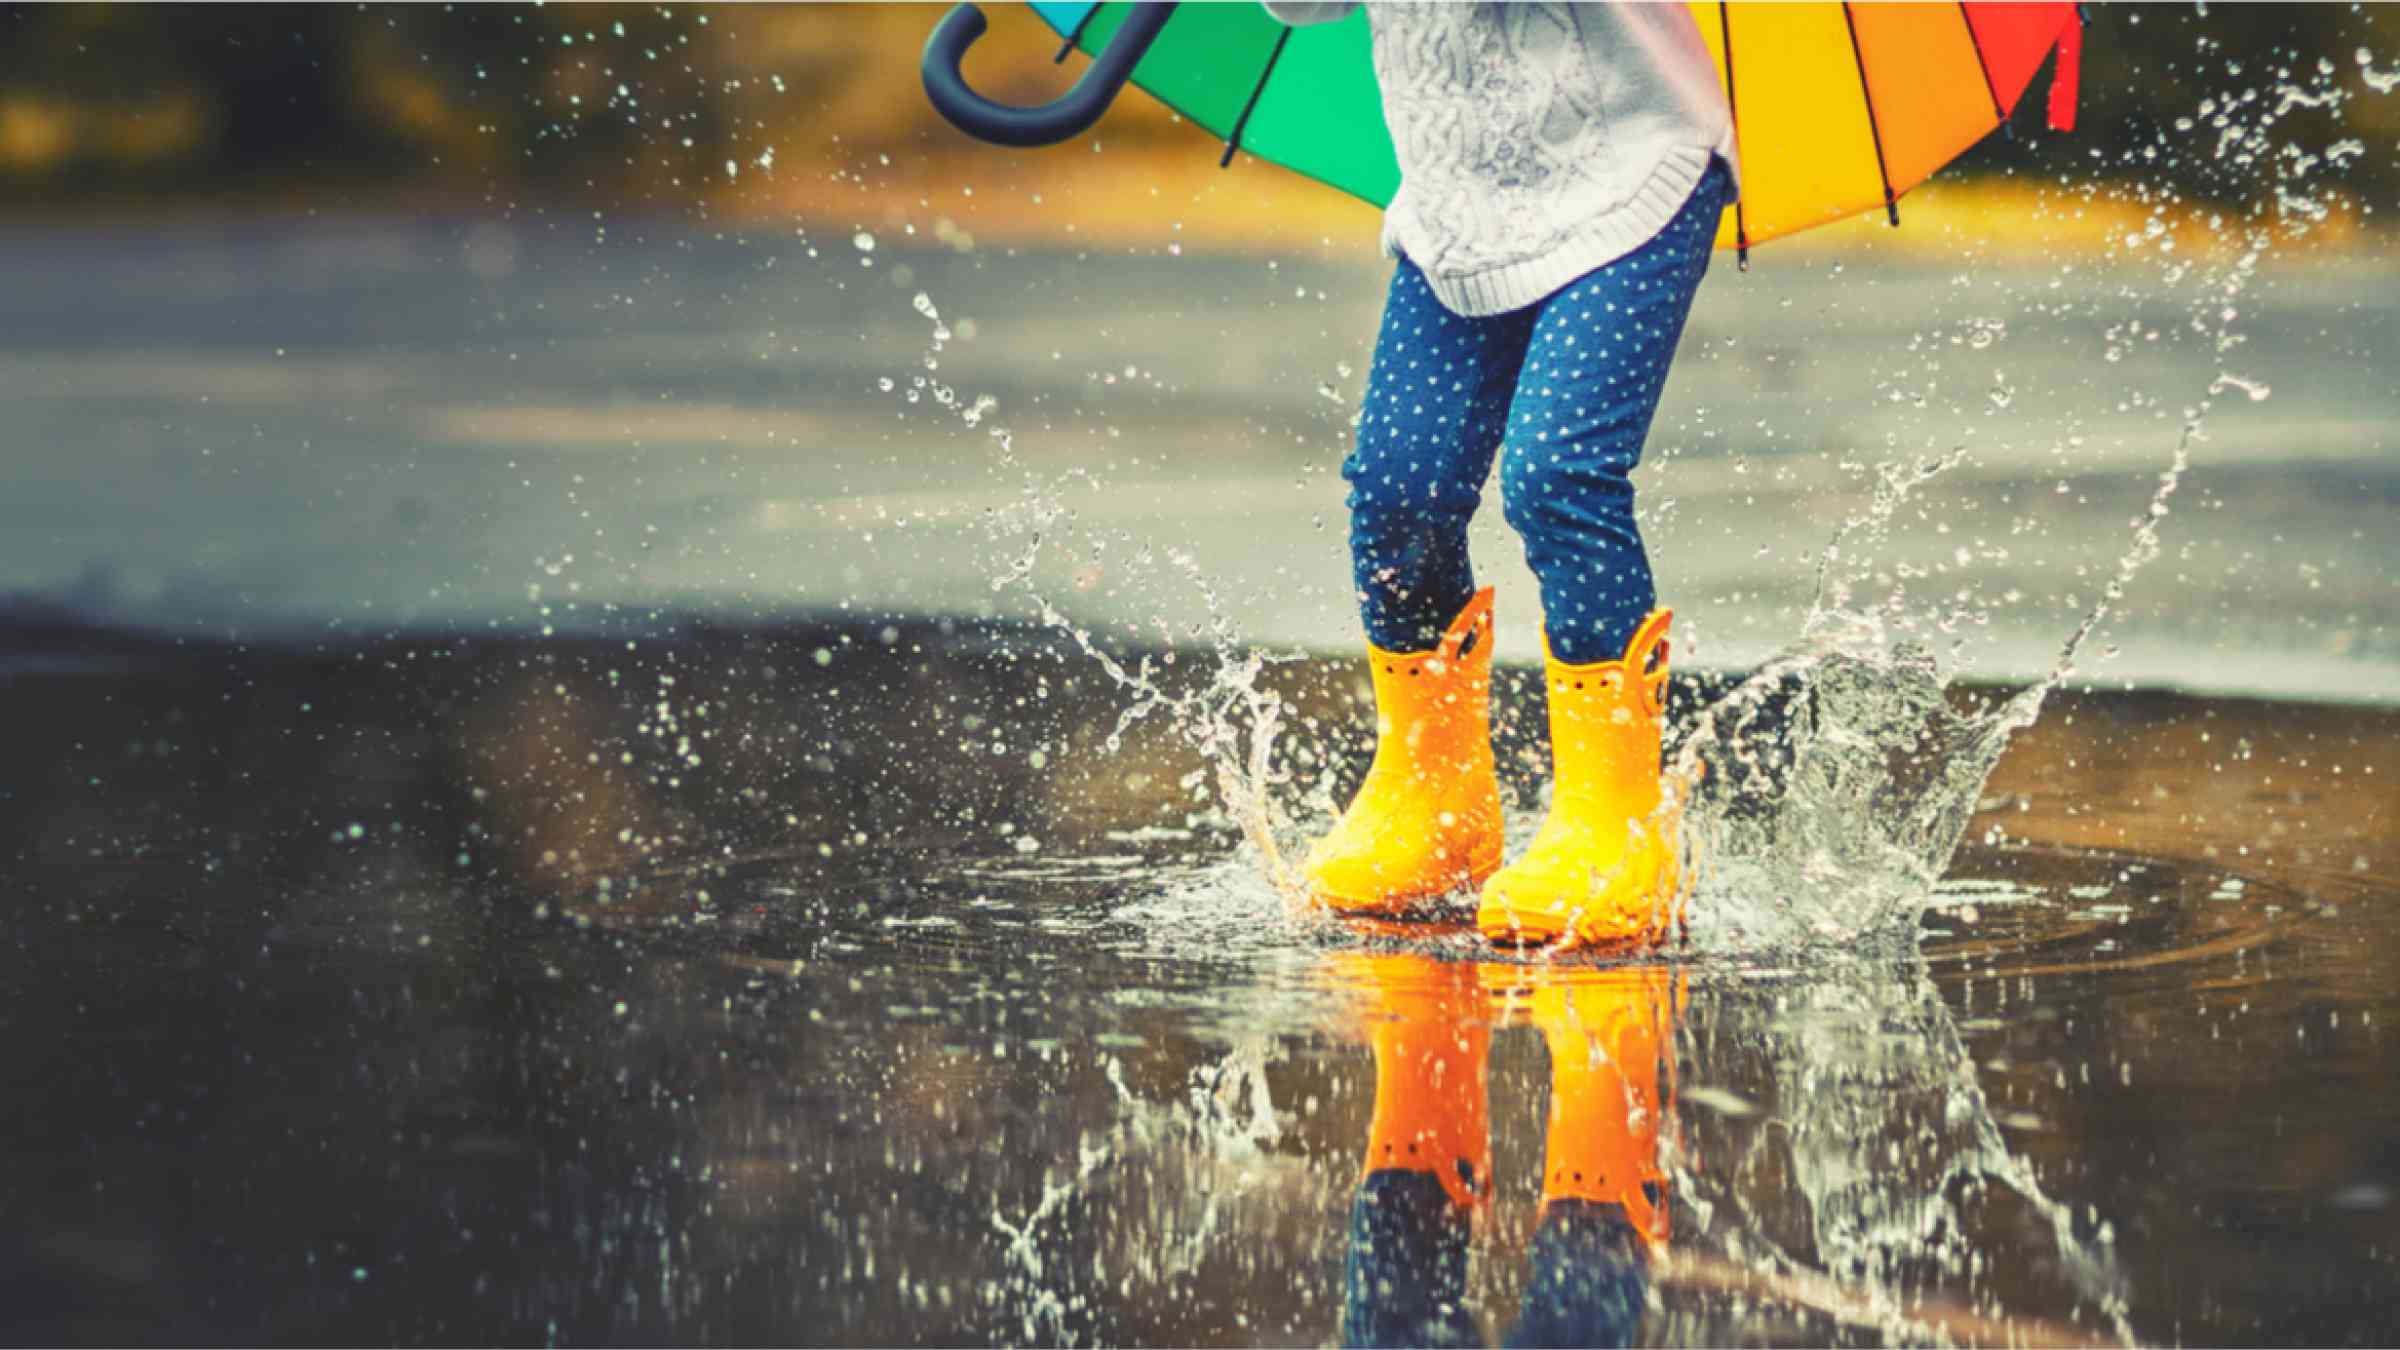 This image shows  thefeet of a child in yellow rubber boots jumping into a puddle of rain.